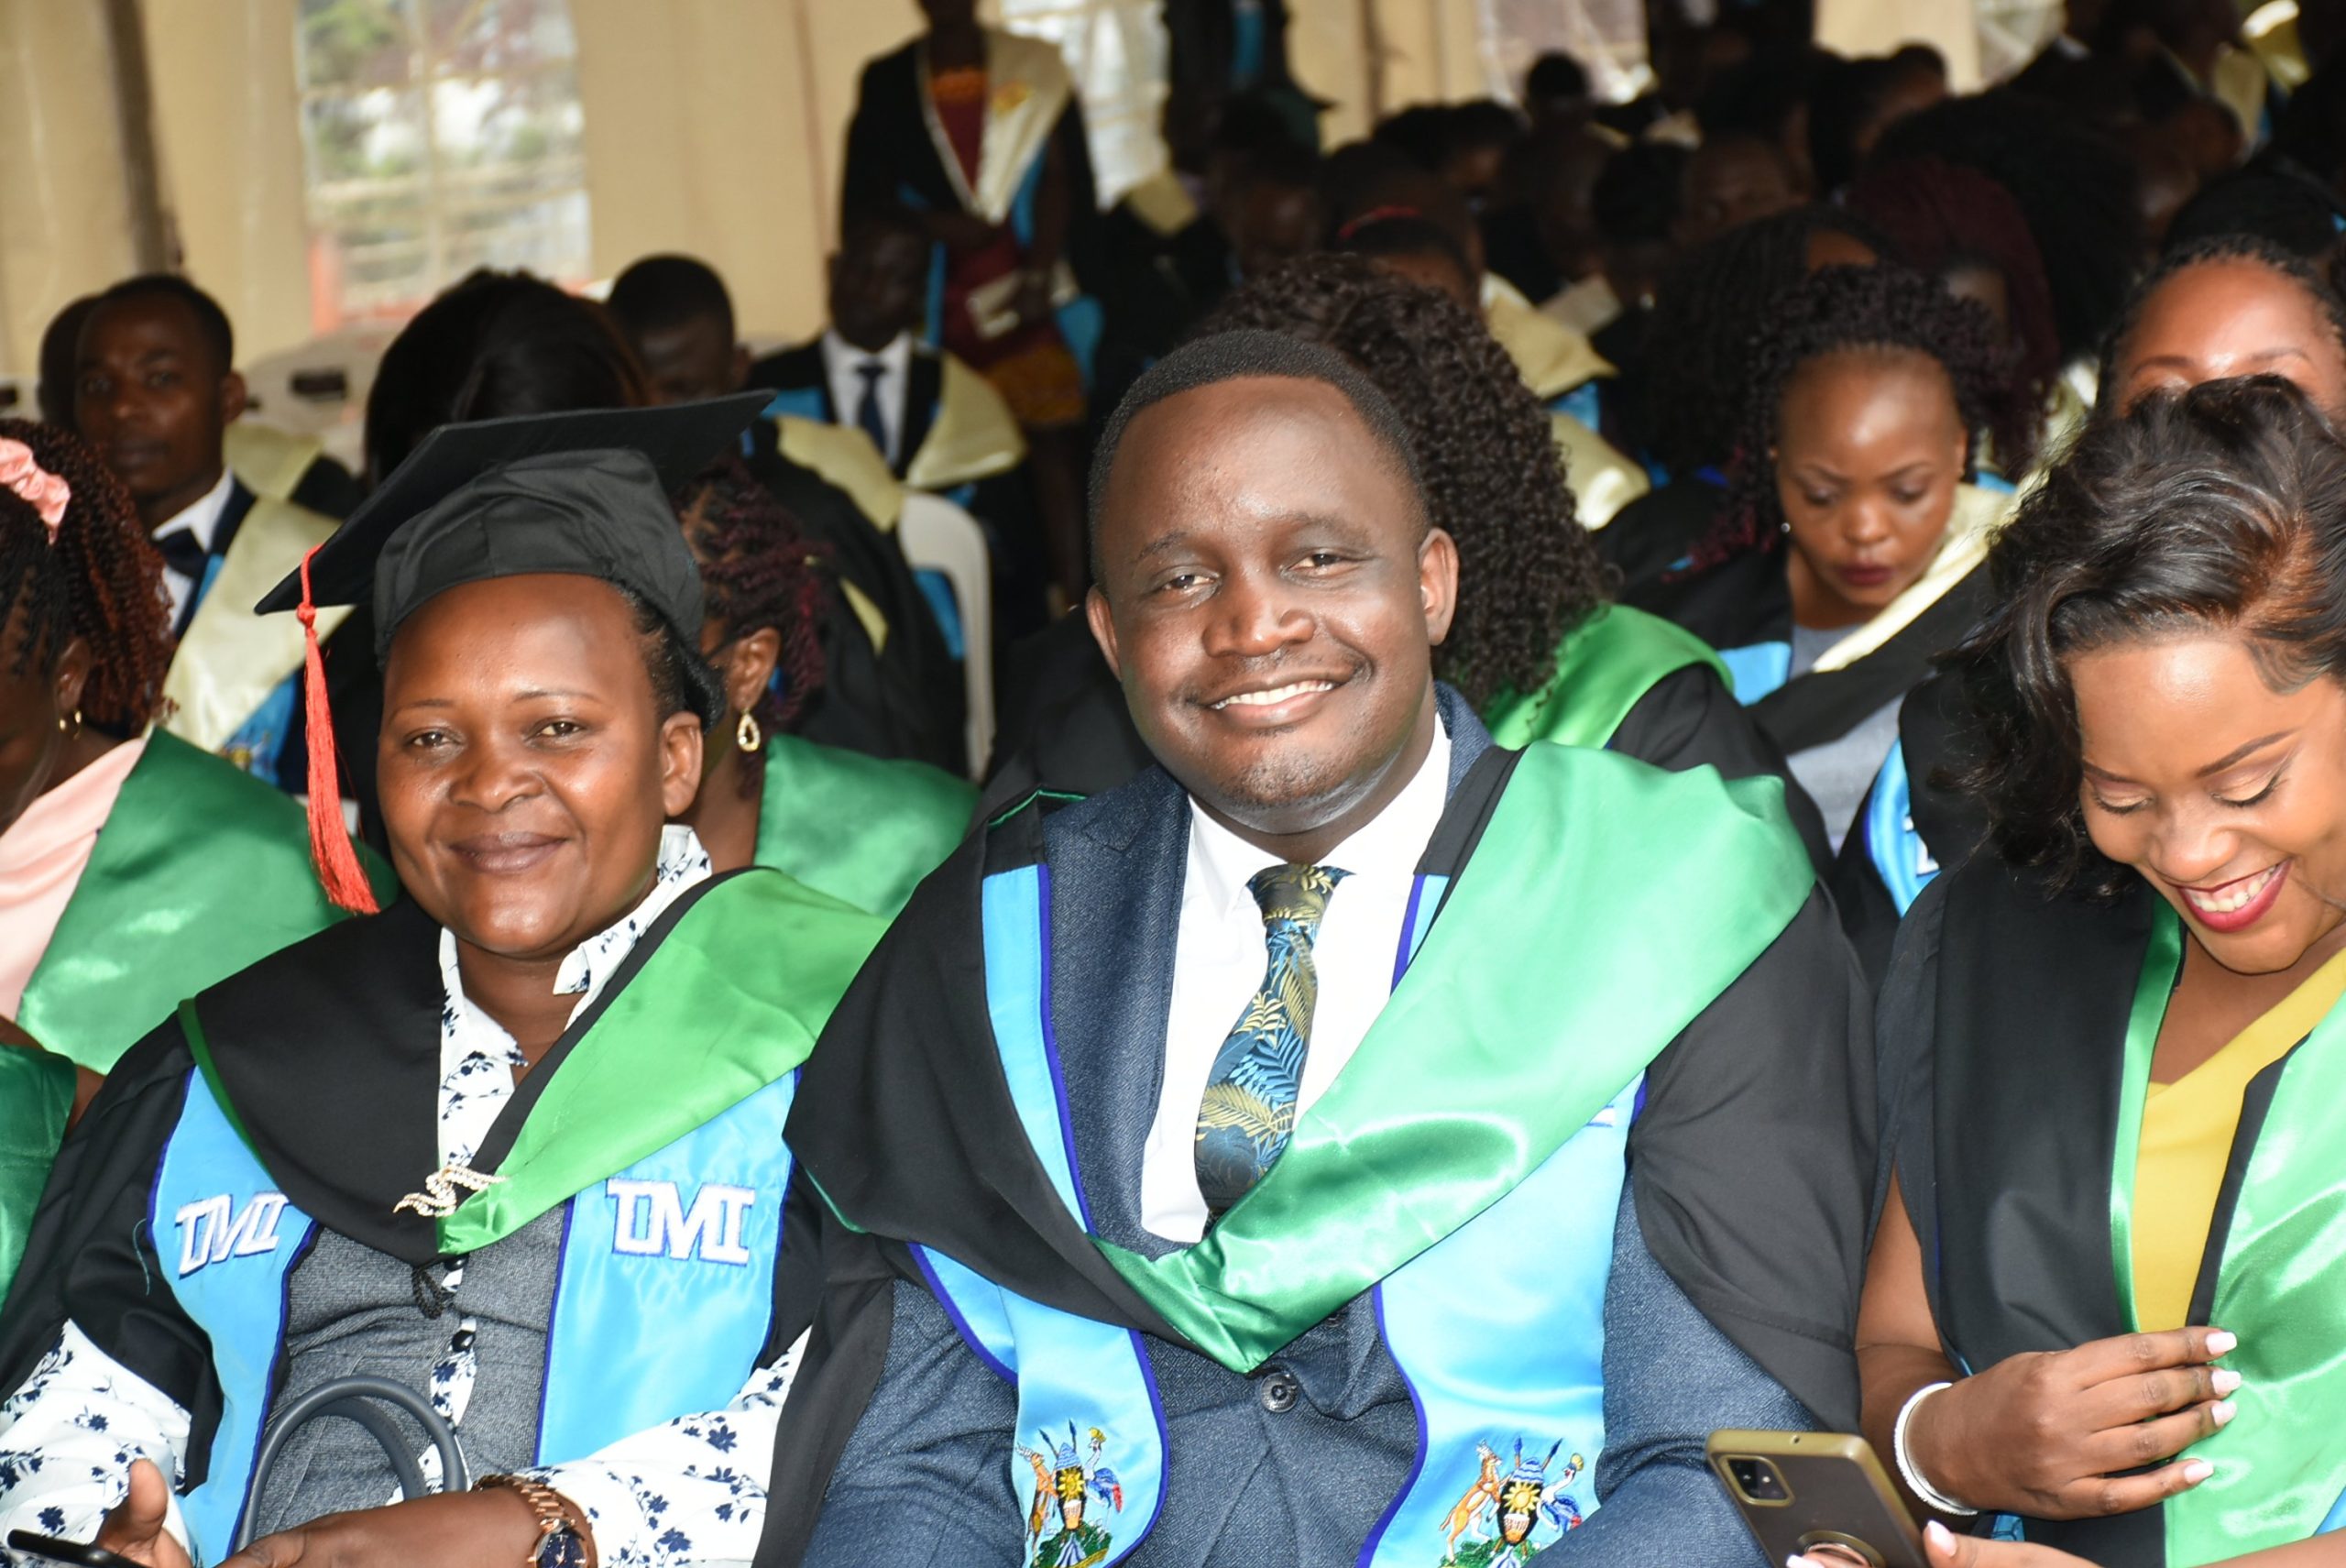 Pictorial: Jubilations as UMI Holds 20th Graduation Ceremony